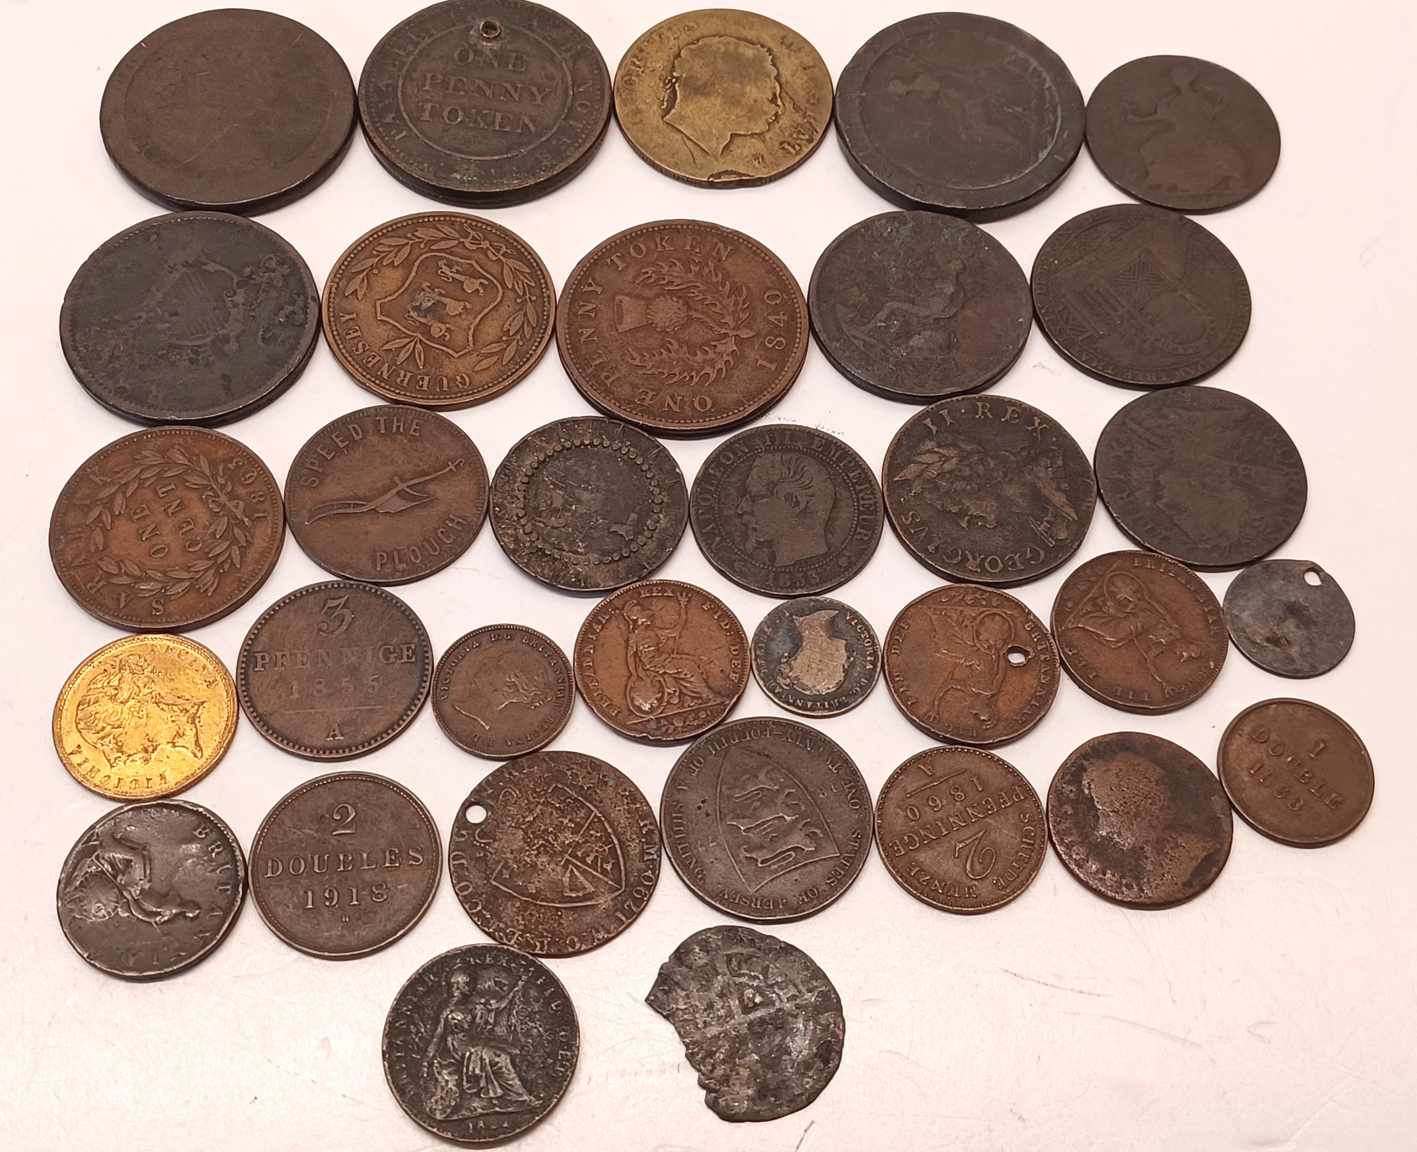 TUB OF MAINLY BRITISH COINS - INC. 1812 ONE PENNY TOKEN,1840 ONE PENNY,1792 CARTWHEEL ETC.